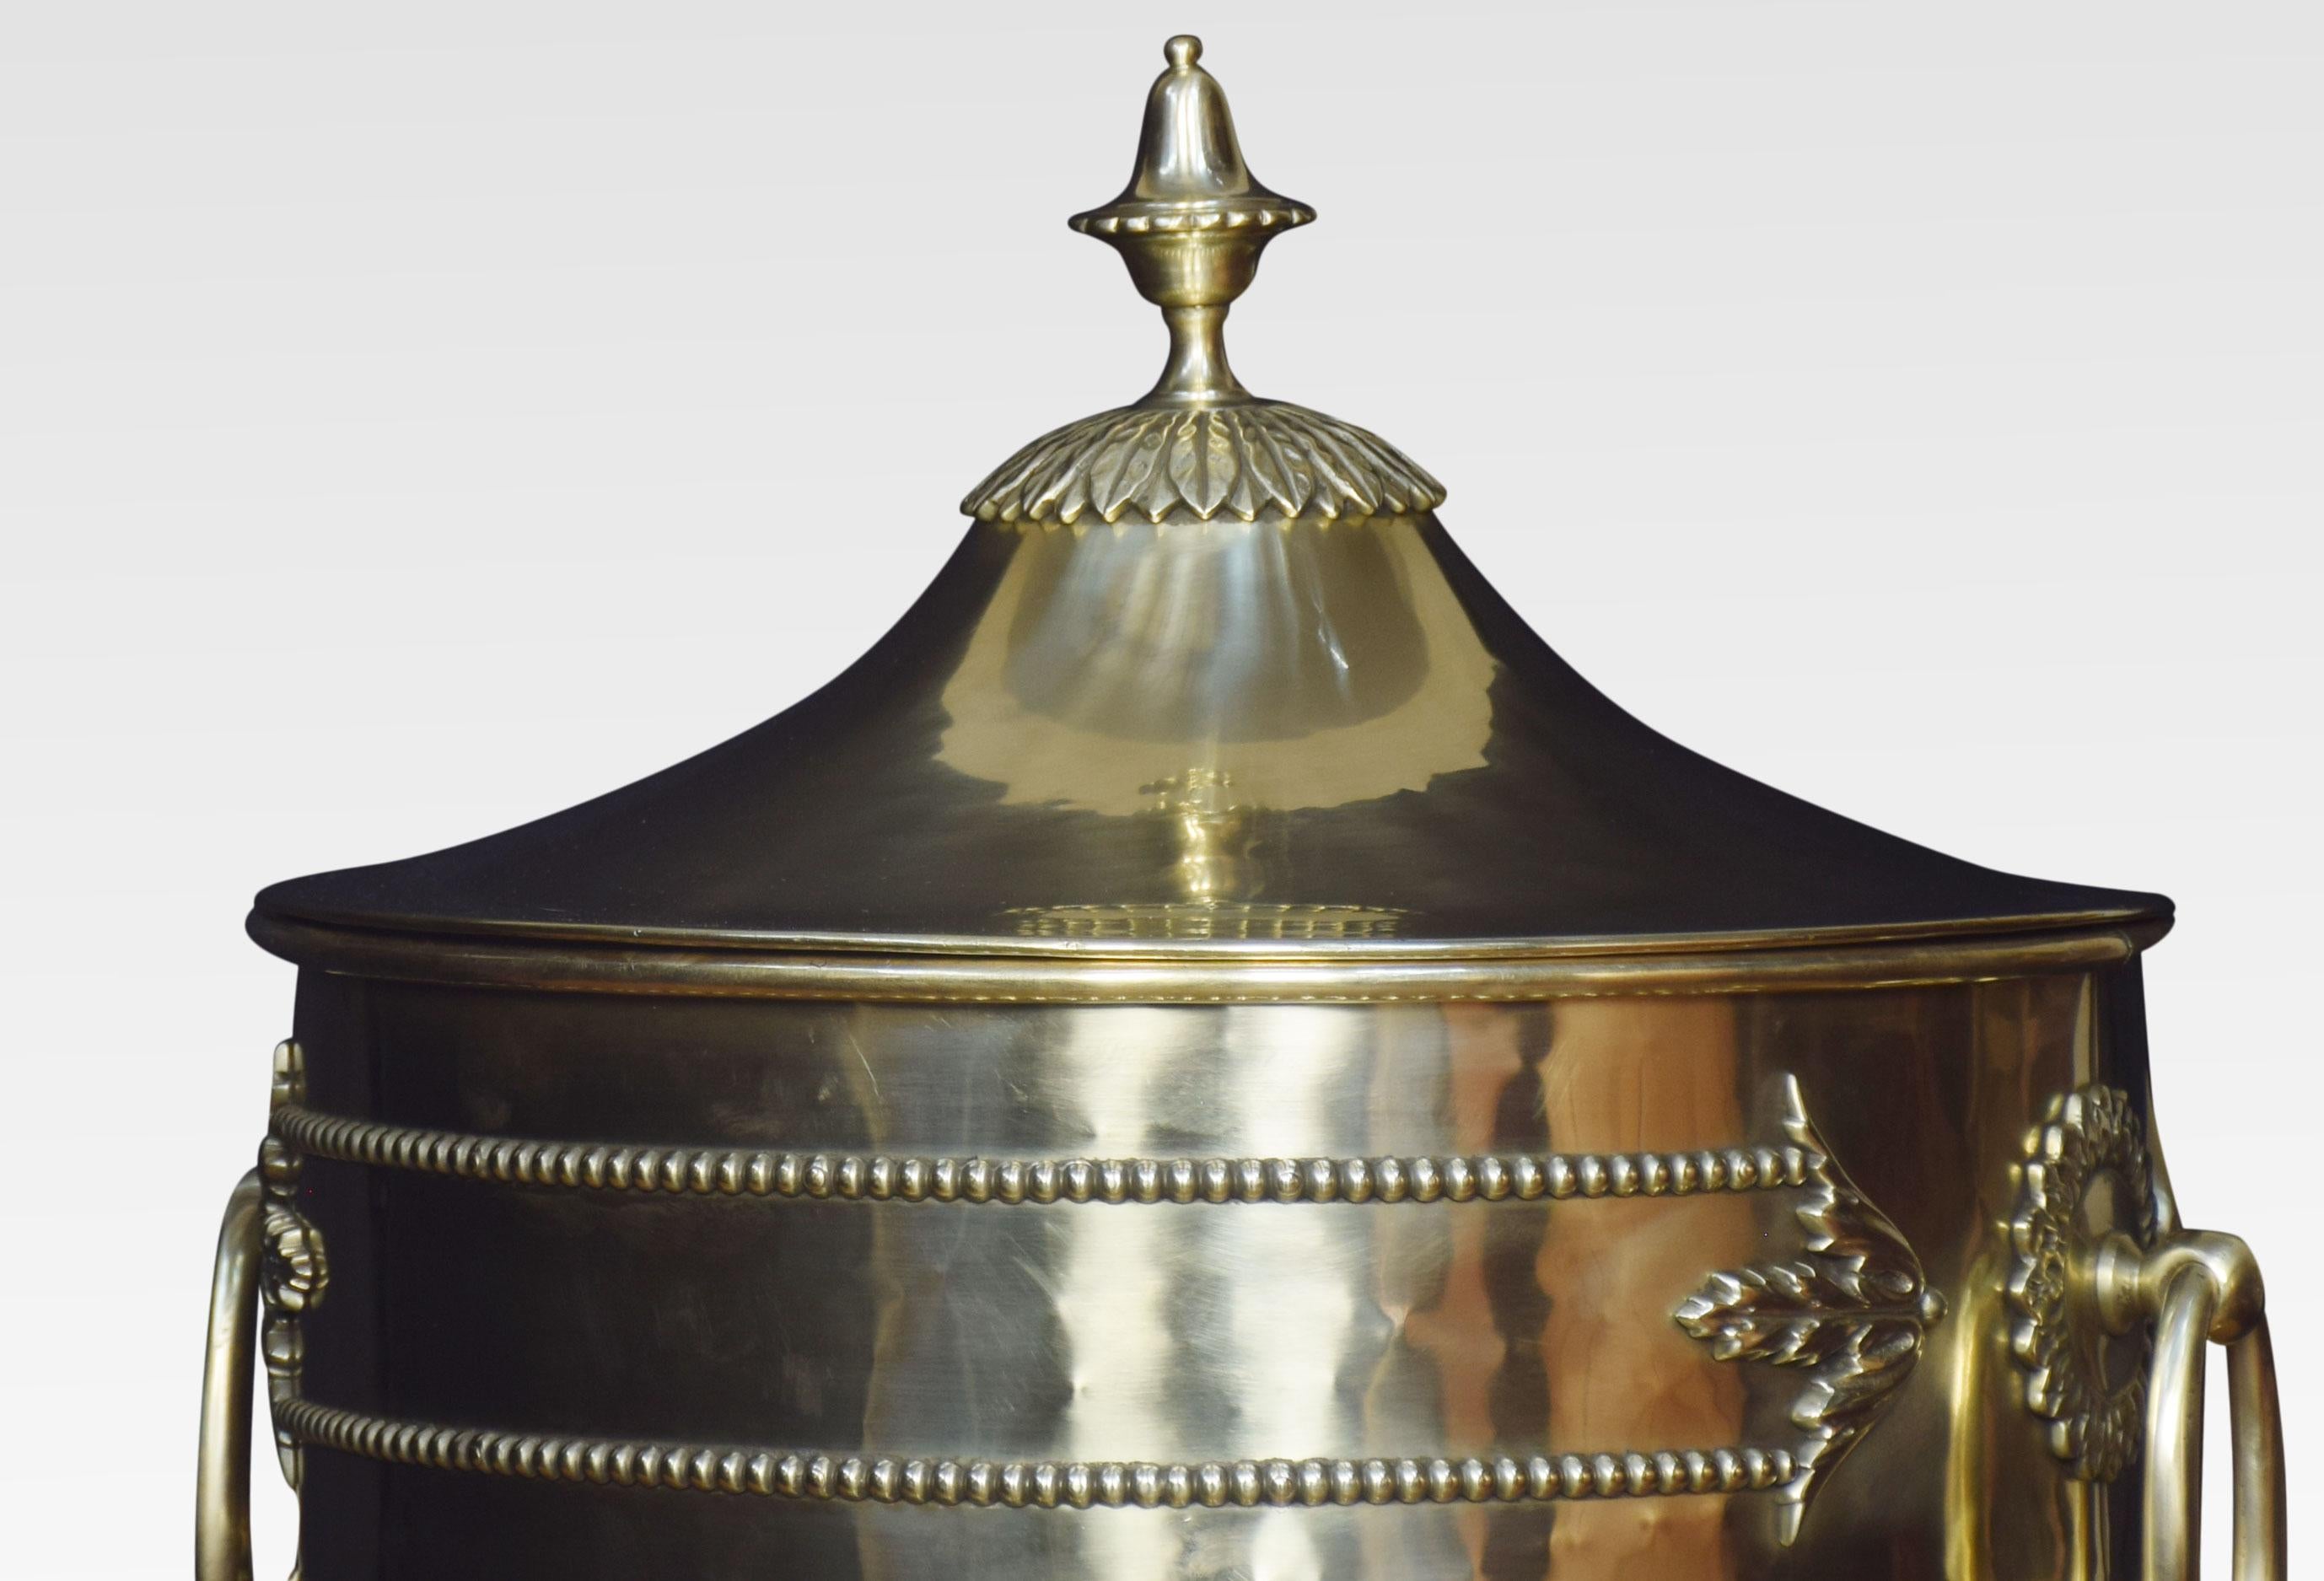 Edwardian brass urn-shaped coal vase, with cast applied decoration and ring handles, together with conforming shovel.
Dimensions
Height 23 inches
Width 11.5 inches
Depth 11.5 inches.